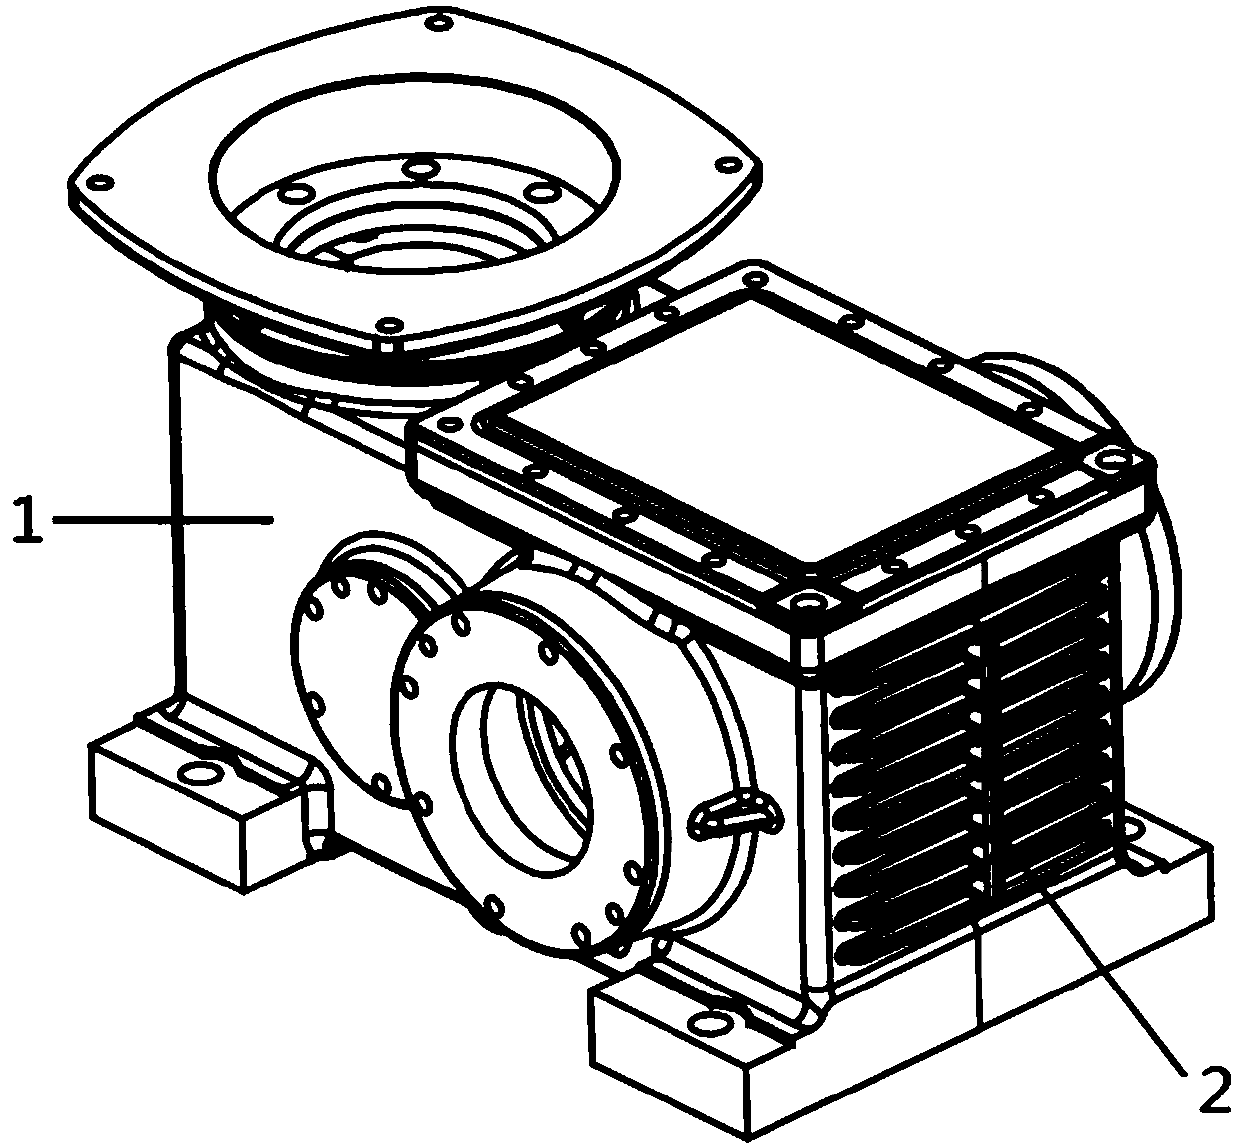 Two-stage worm and gear bevel wheel transmission speed reducer